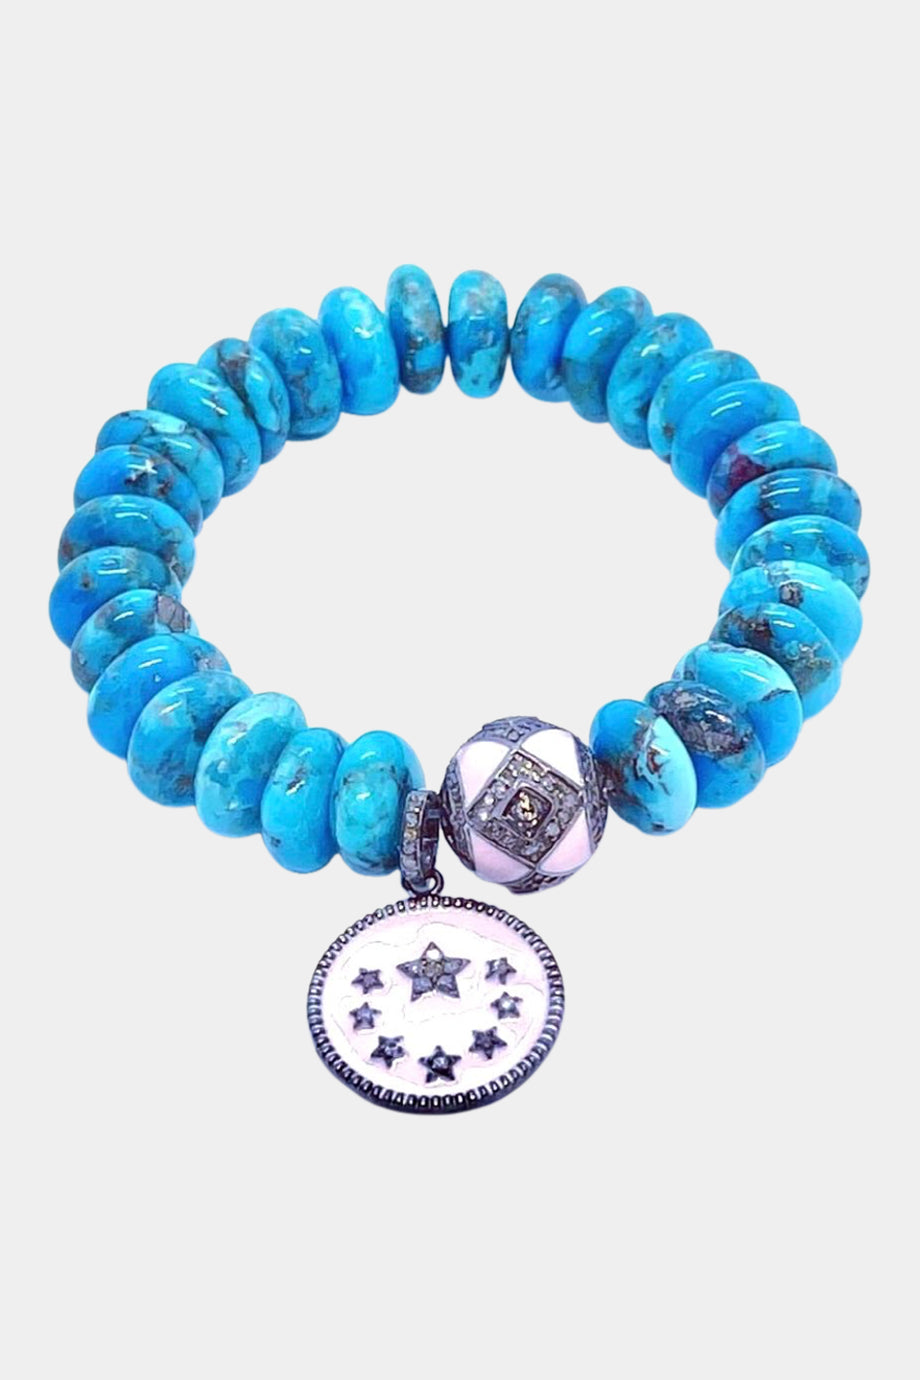 Turquoise Stretch Bracelet with Pink Enamel Star Pendant